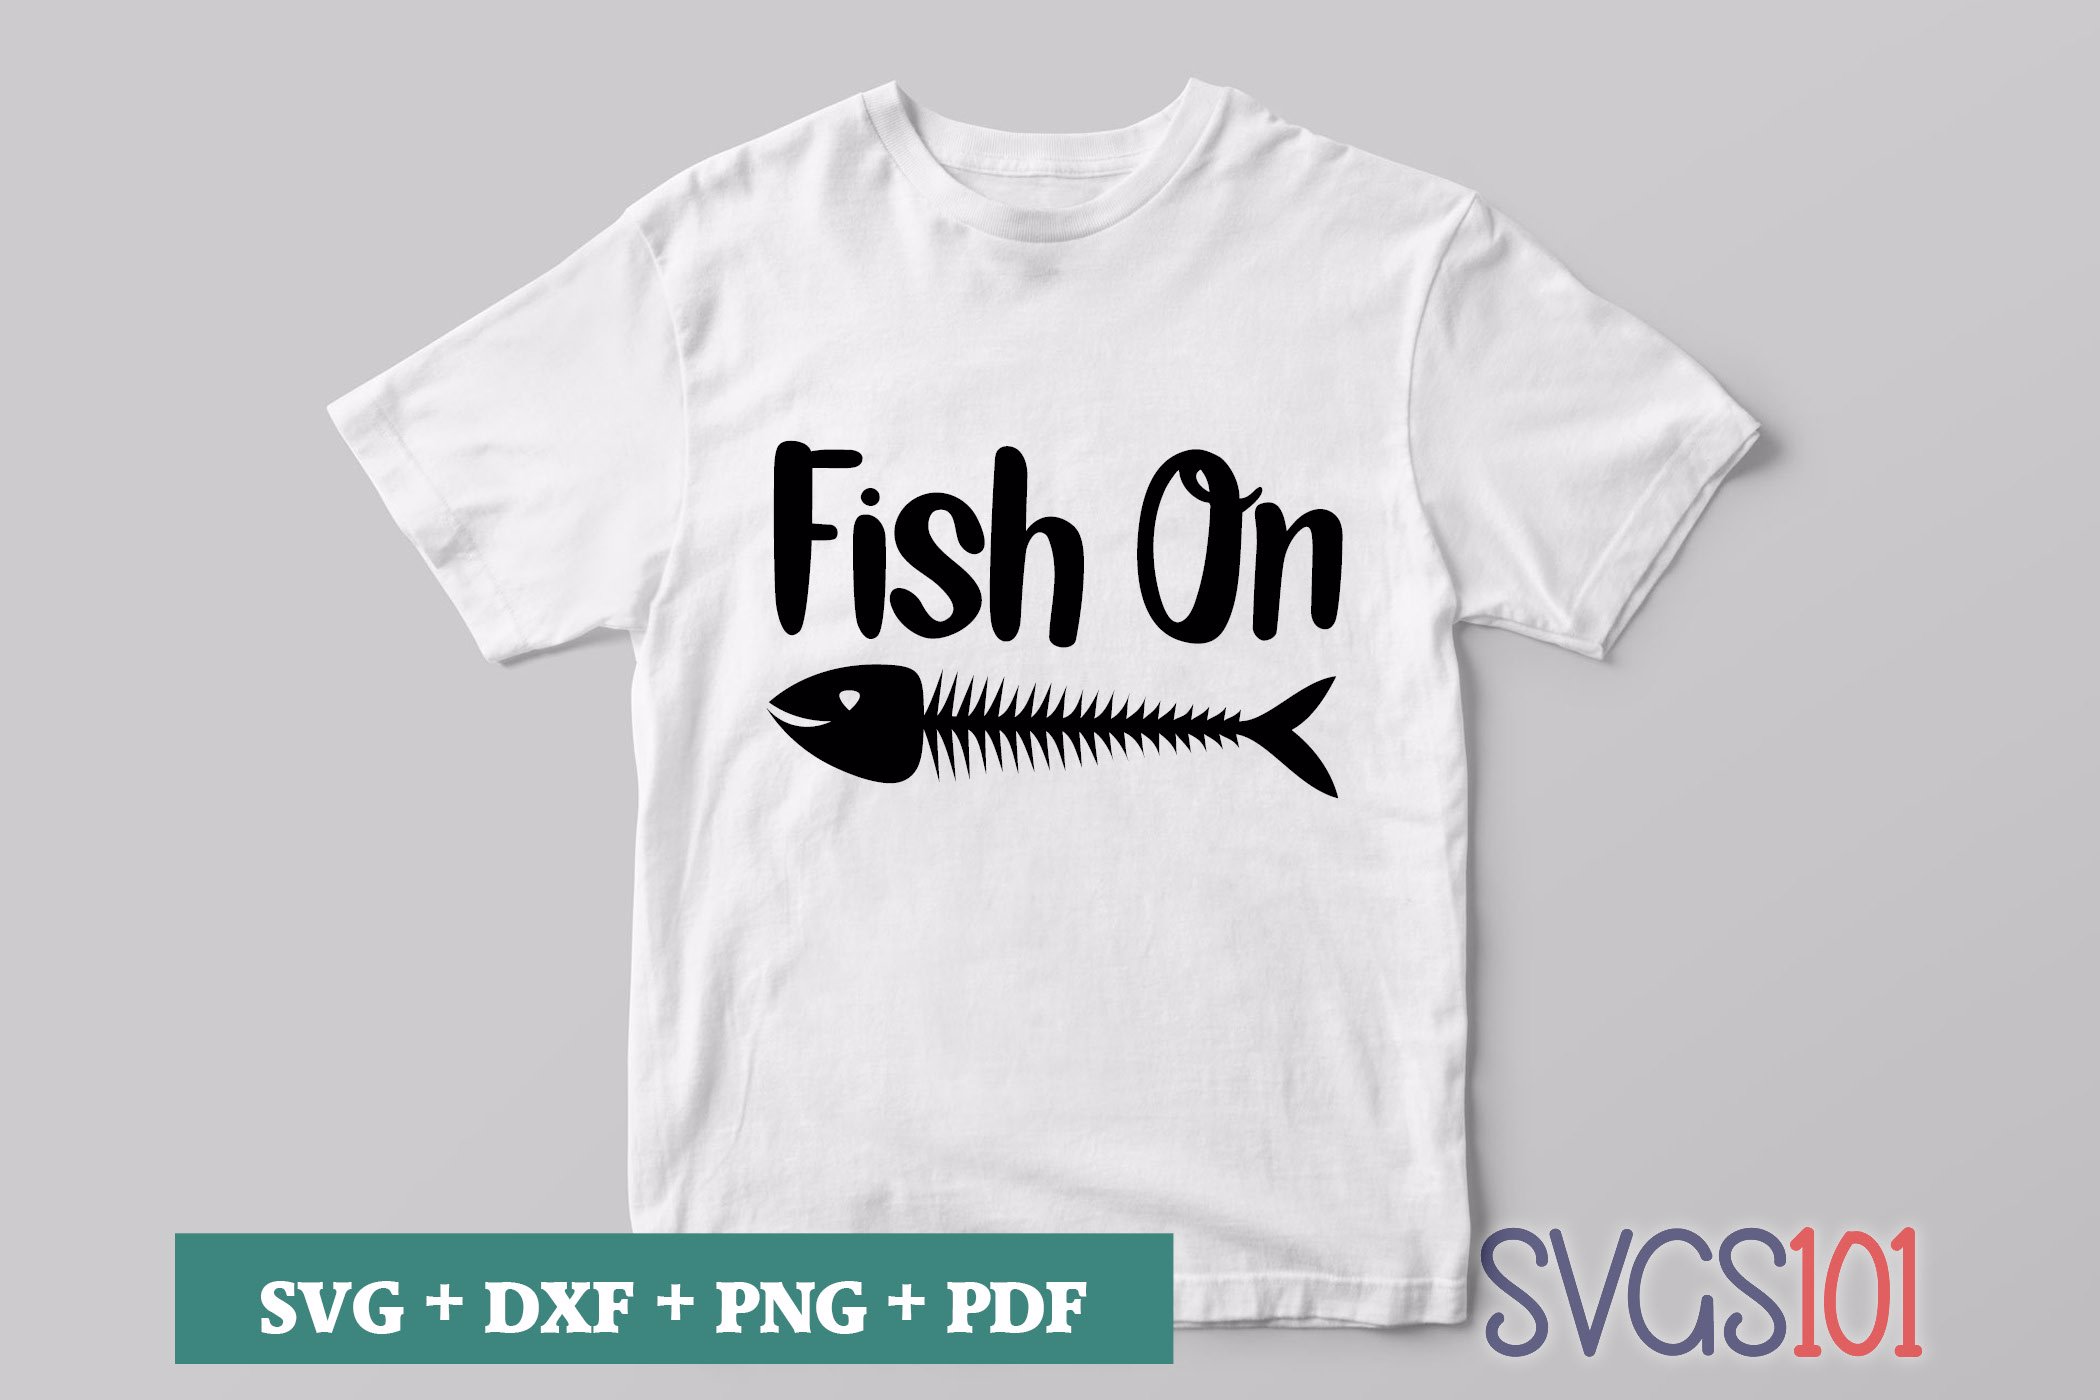 Fish On SVG Cuttable file - DXF, EPS, PNG, PDF | SVG Cutting File